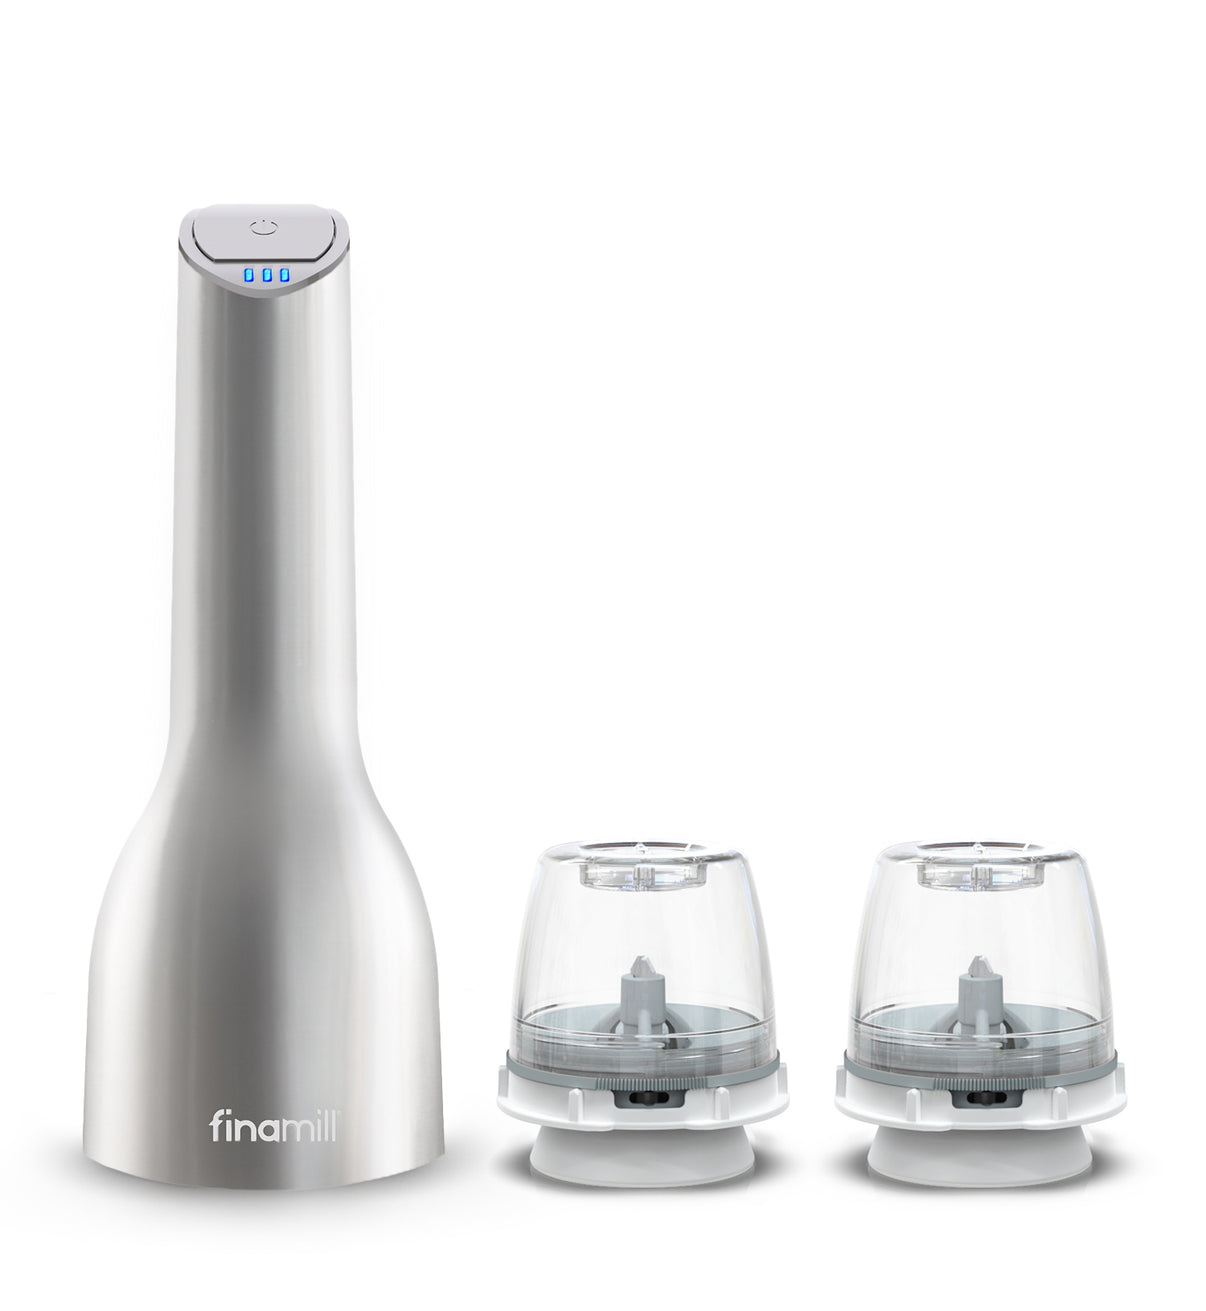 FinaMill Rechargeable spice grinder - Stainless Steel